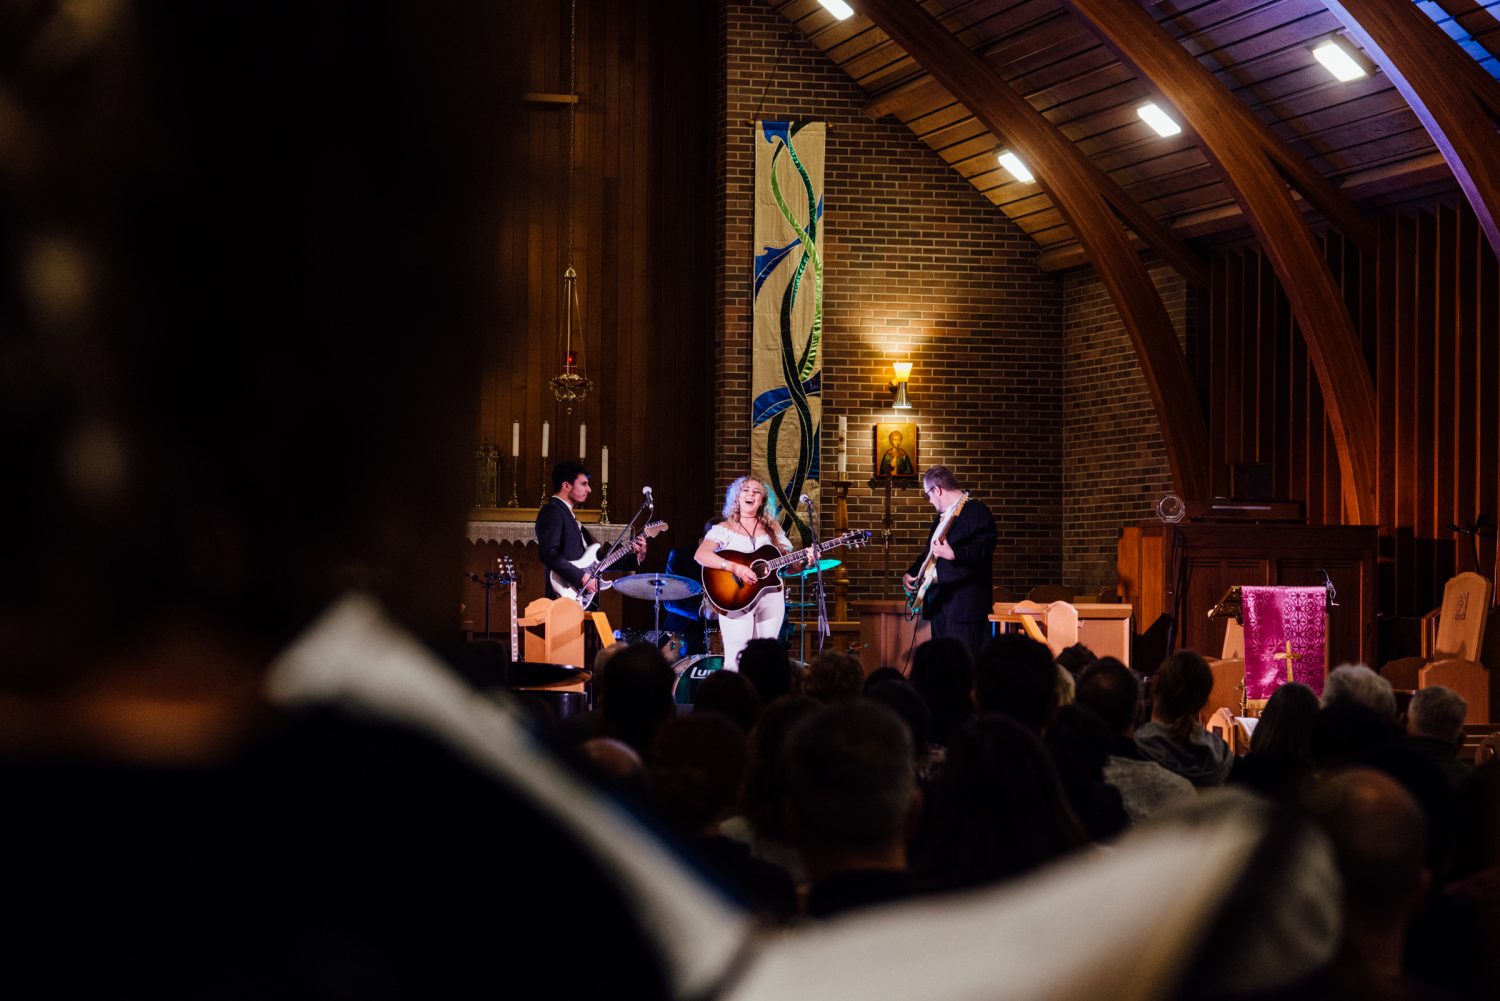 Maddie Storvold & the Moonlighters performs with choirs Bella Voce and ChandraTala at Songs in the Sanctuary 2020. Photo by BB Collective.